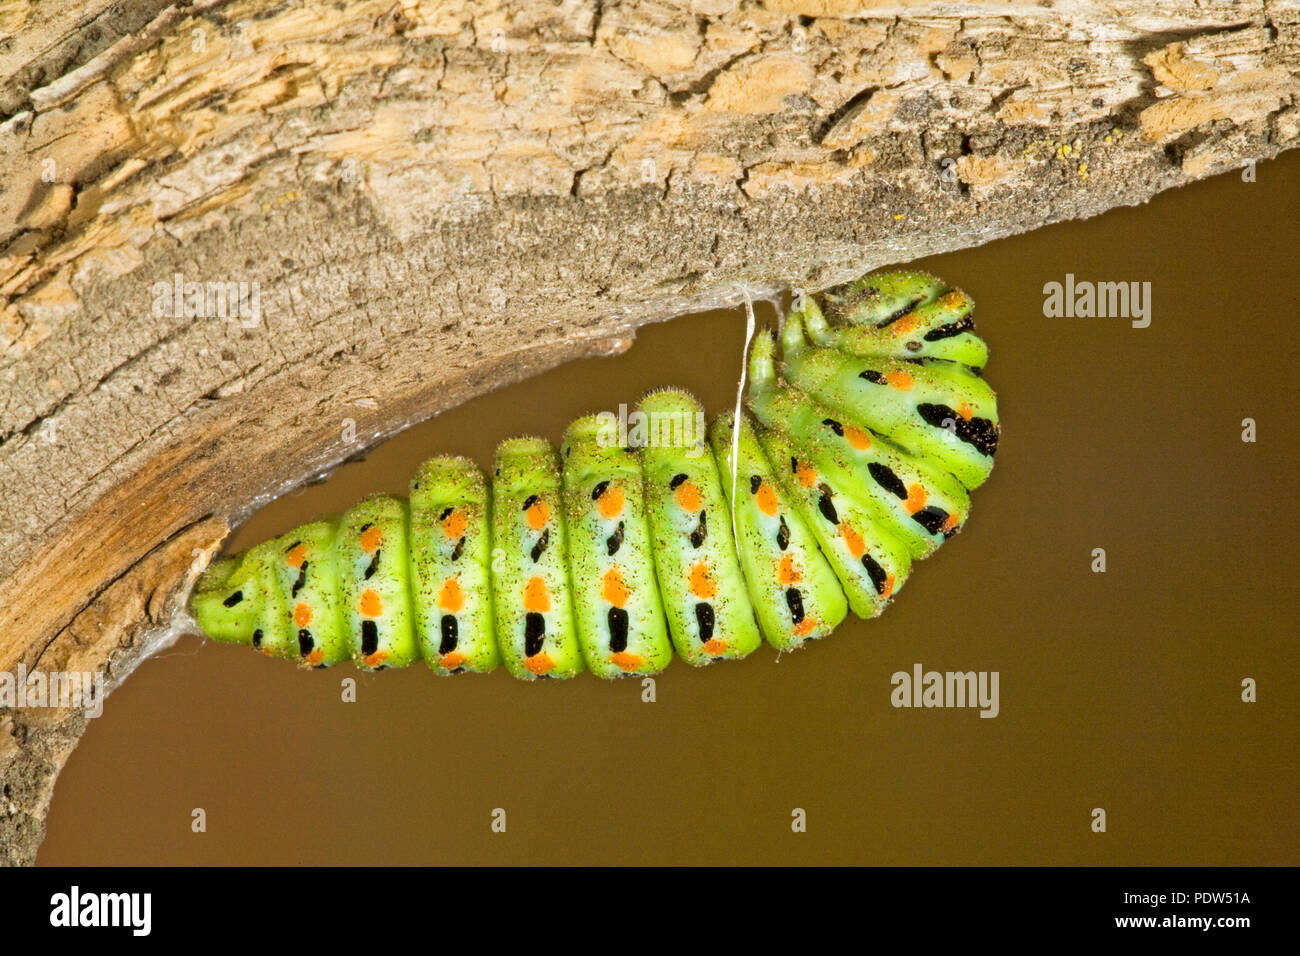 The chrysalis stage of an Anise swallowtail butterfly caterpillar, Papil, silked to a tree branch, in the Cascade Mountains of central Oregon. Stock Photo